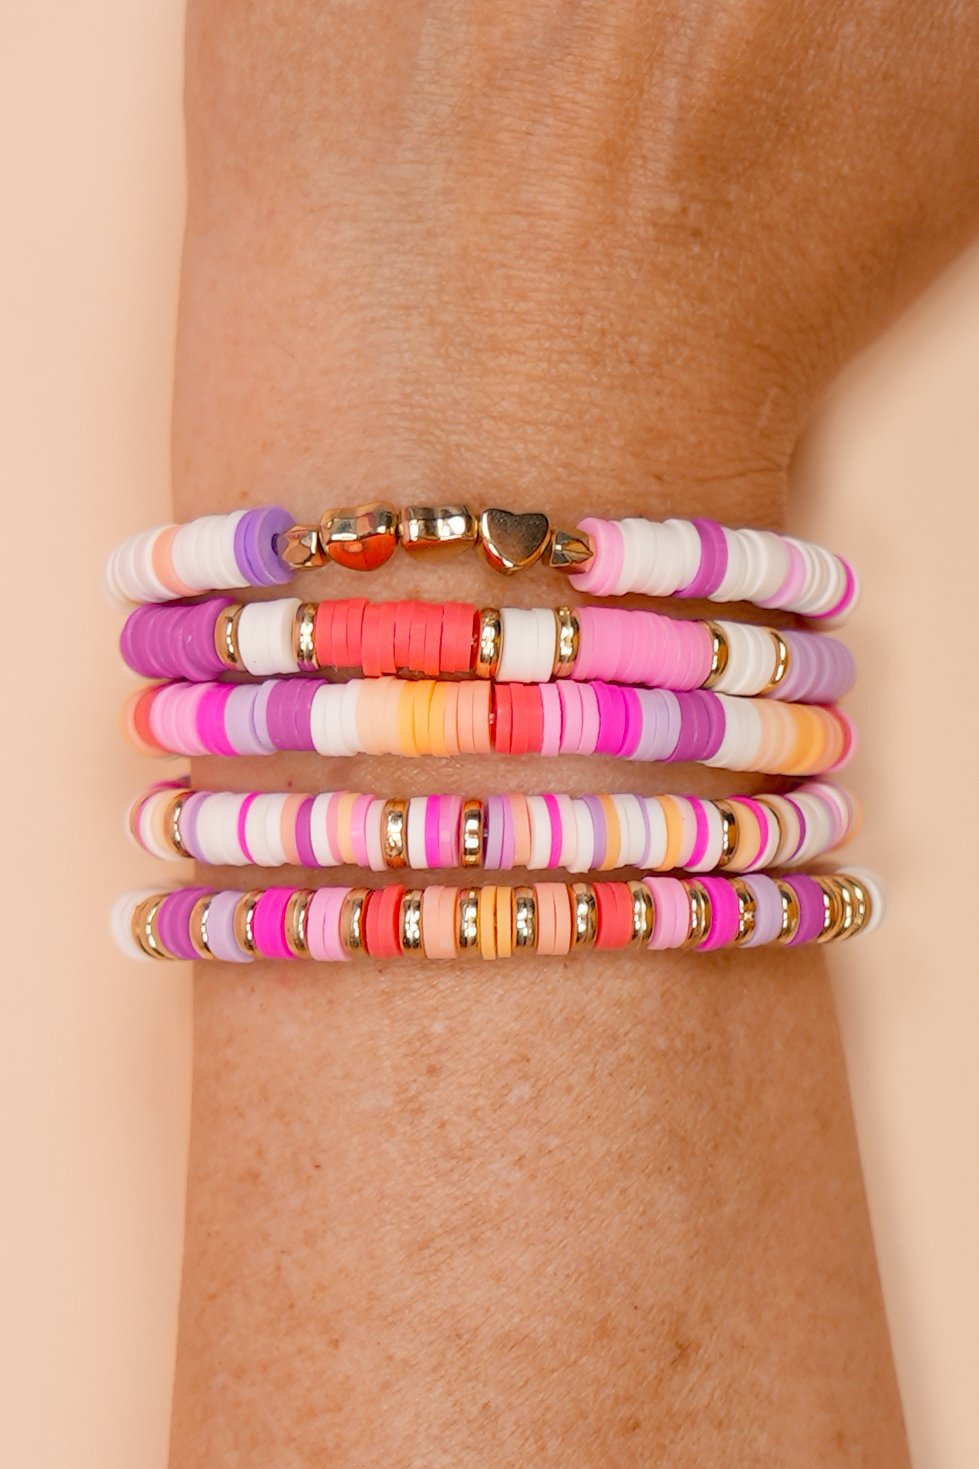 Preppy Clay Bead Bracelet Ideas & How-to Tutorial - Happiness is